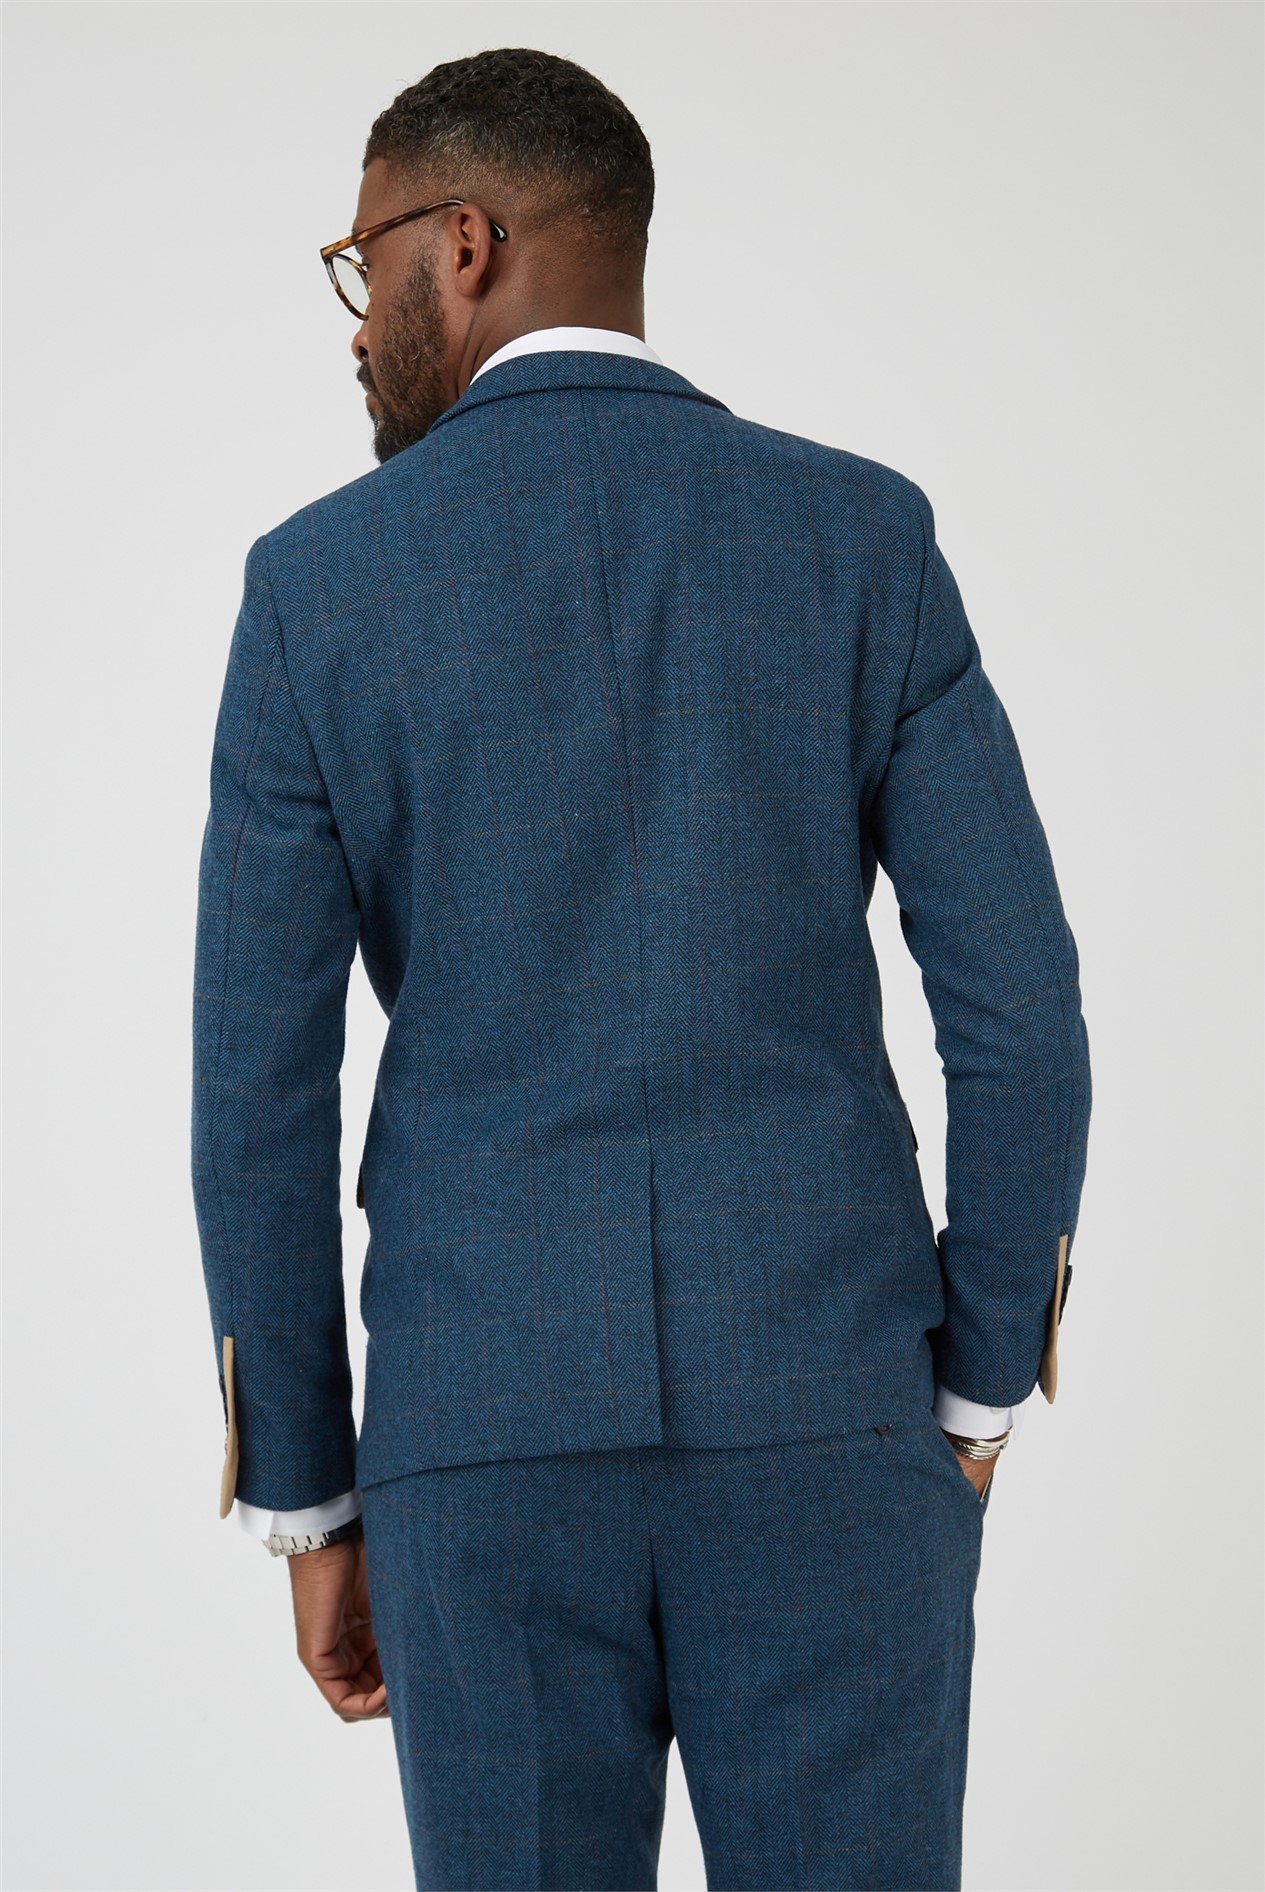 Buy 3 Piece Slim Fit Blue Check Suit in India